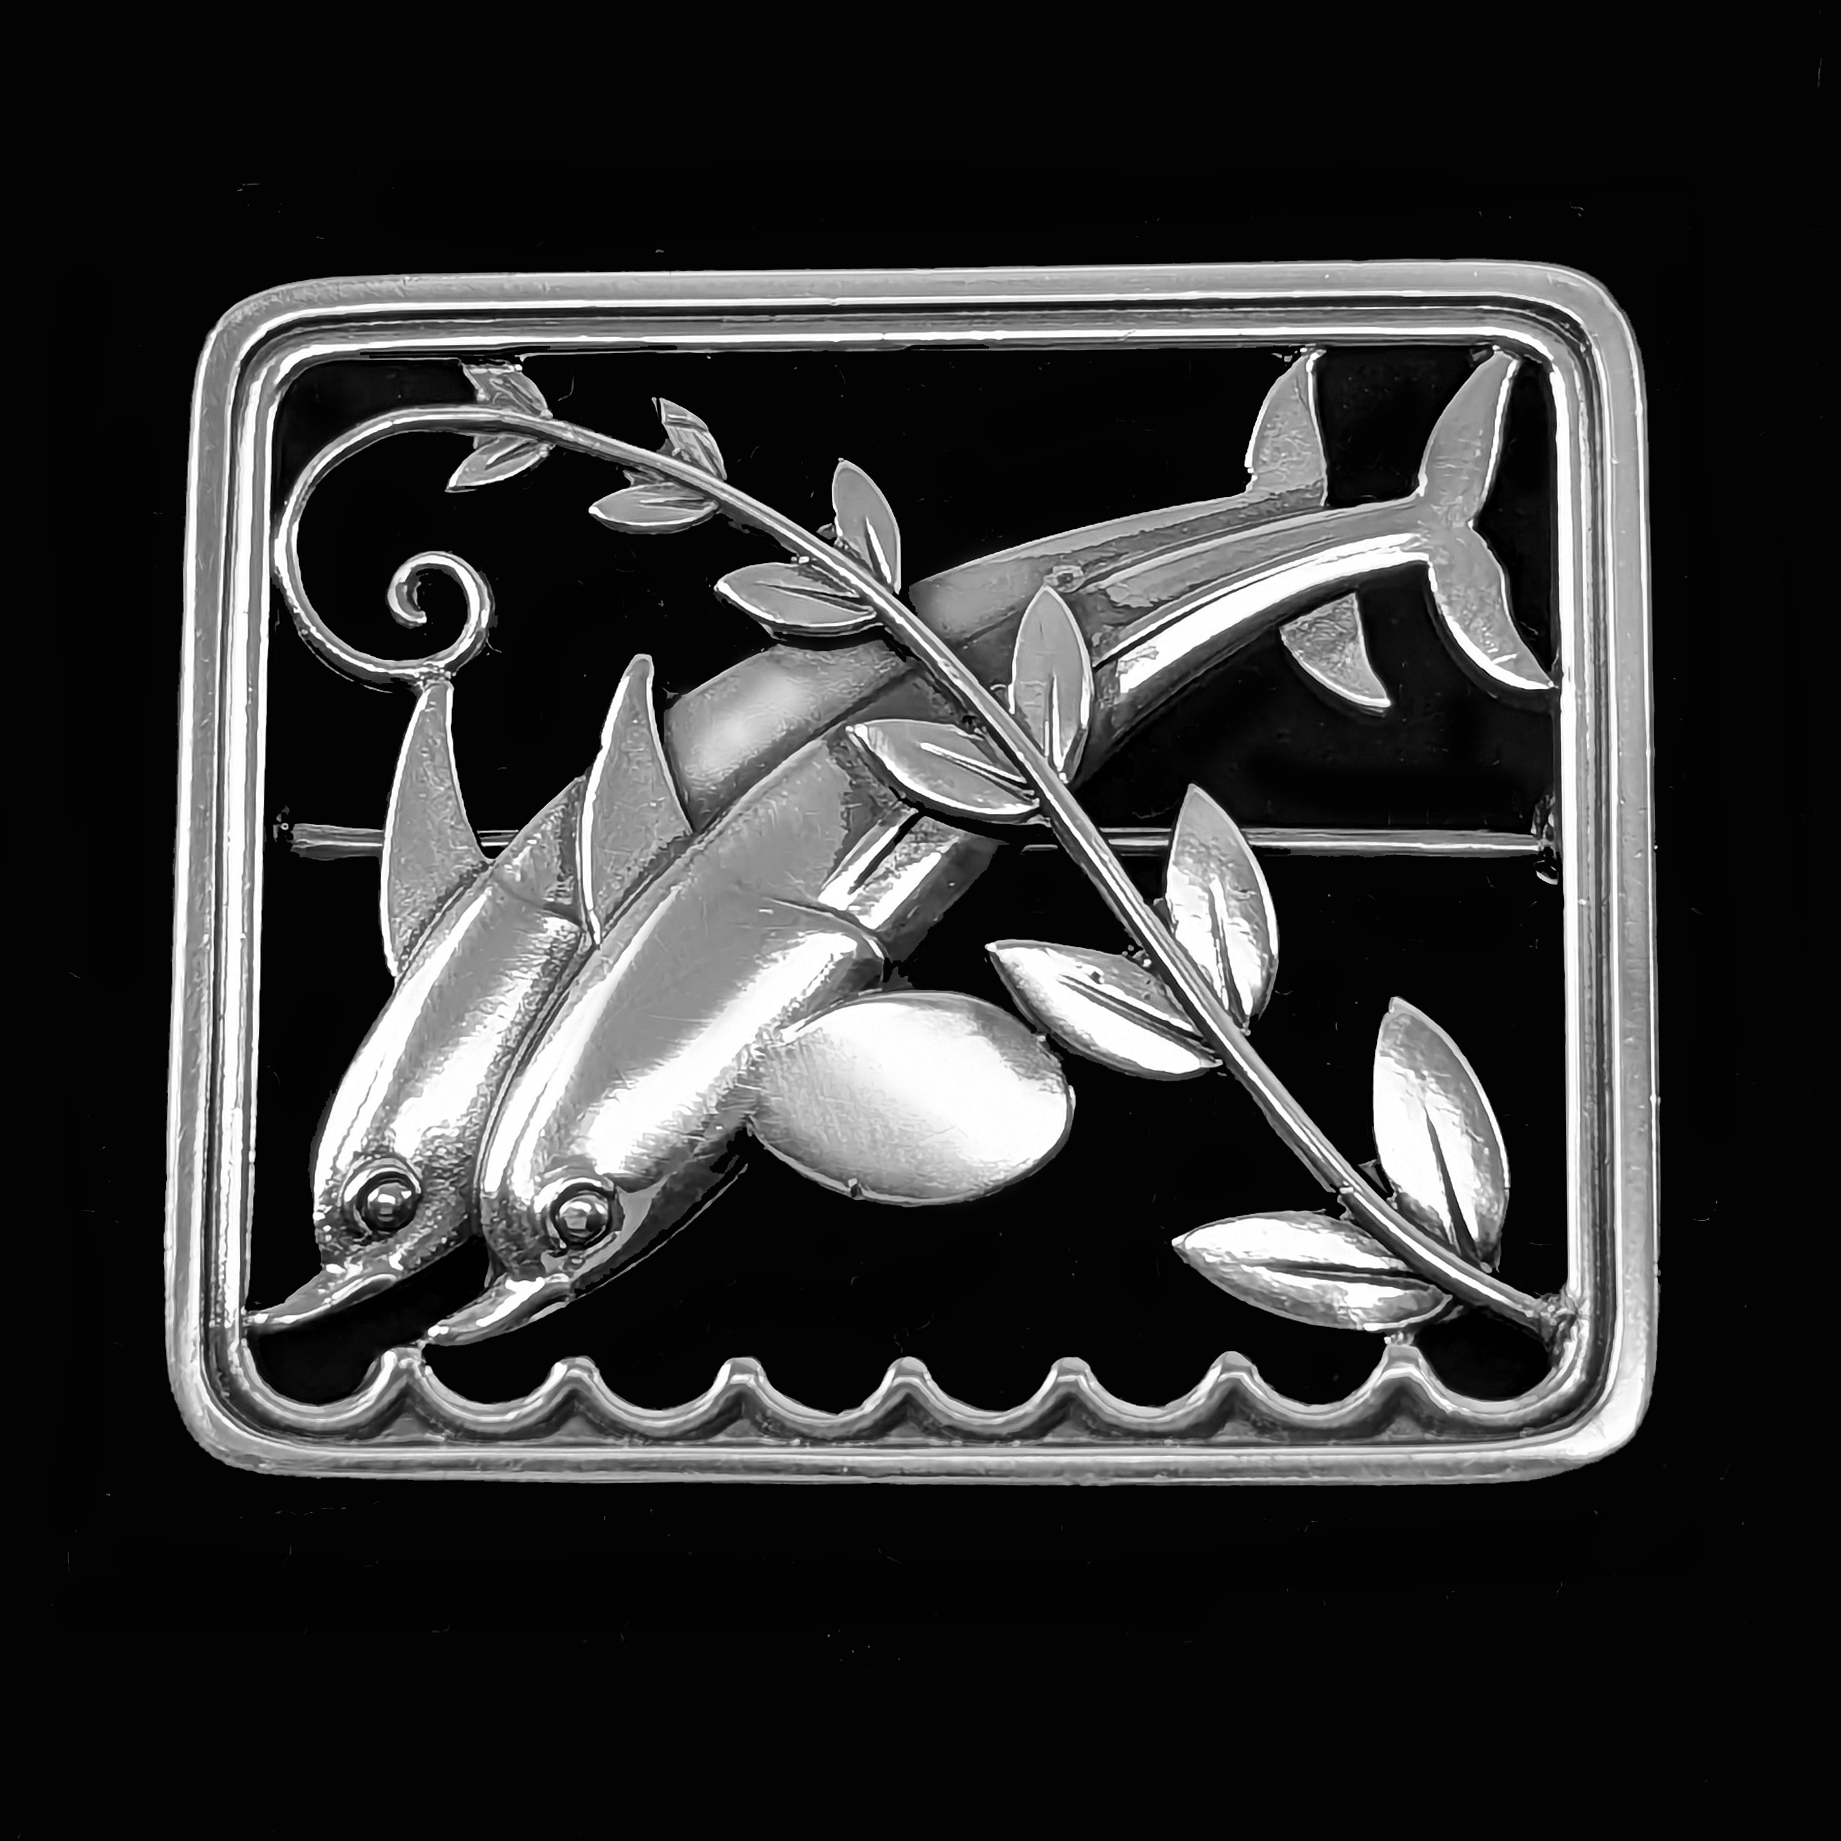 Georg jensen leaping dolphins